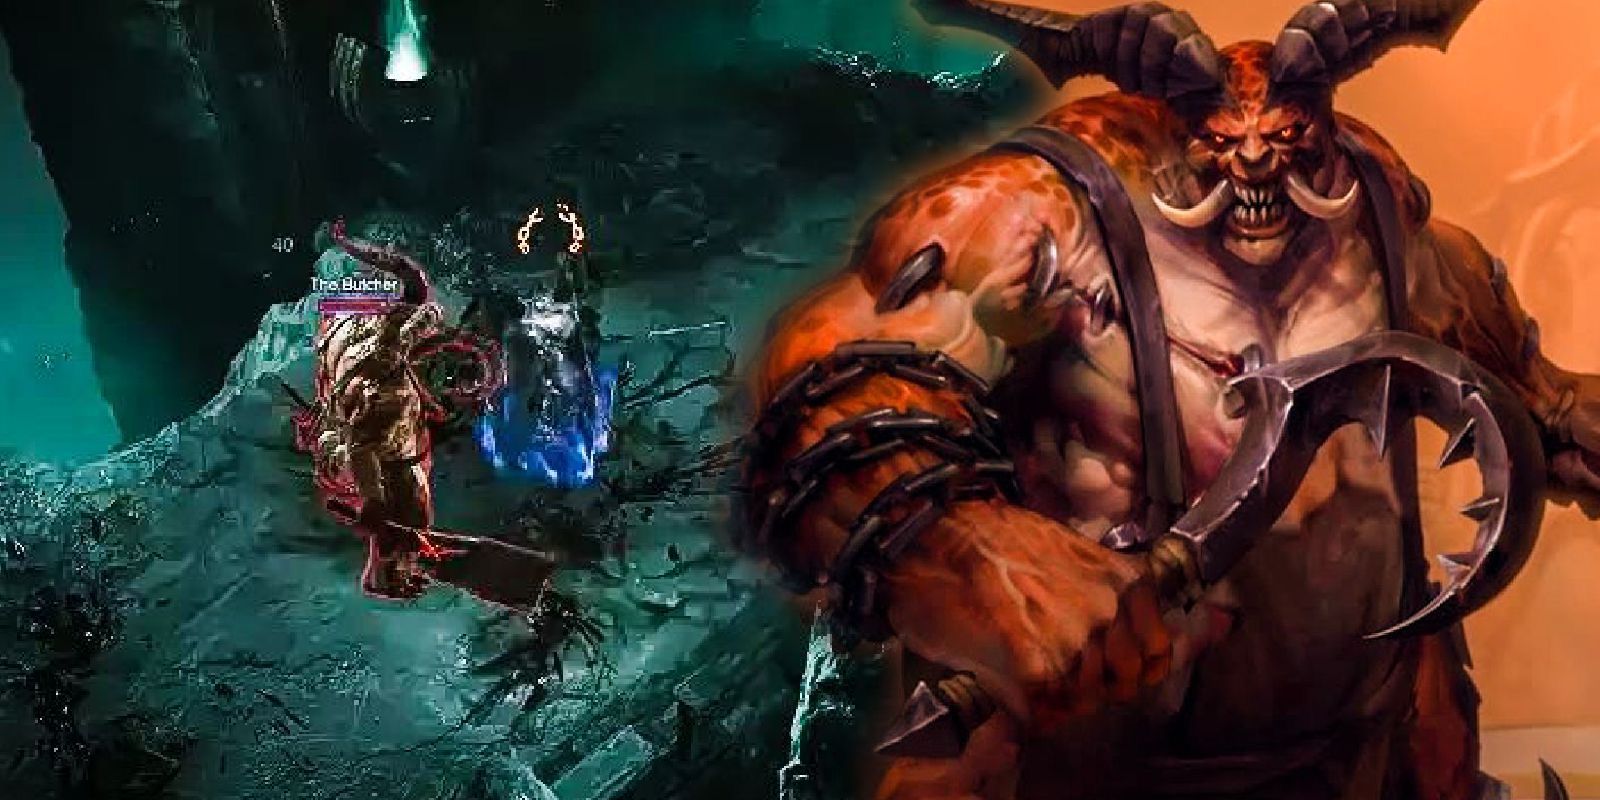 A gameplay screenshot of The Butcher next to artwork of the Diablo character